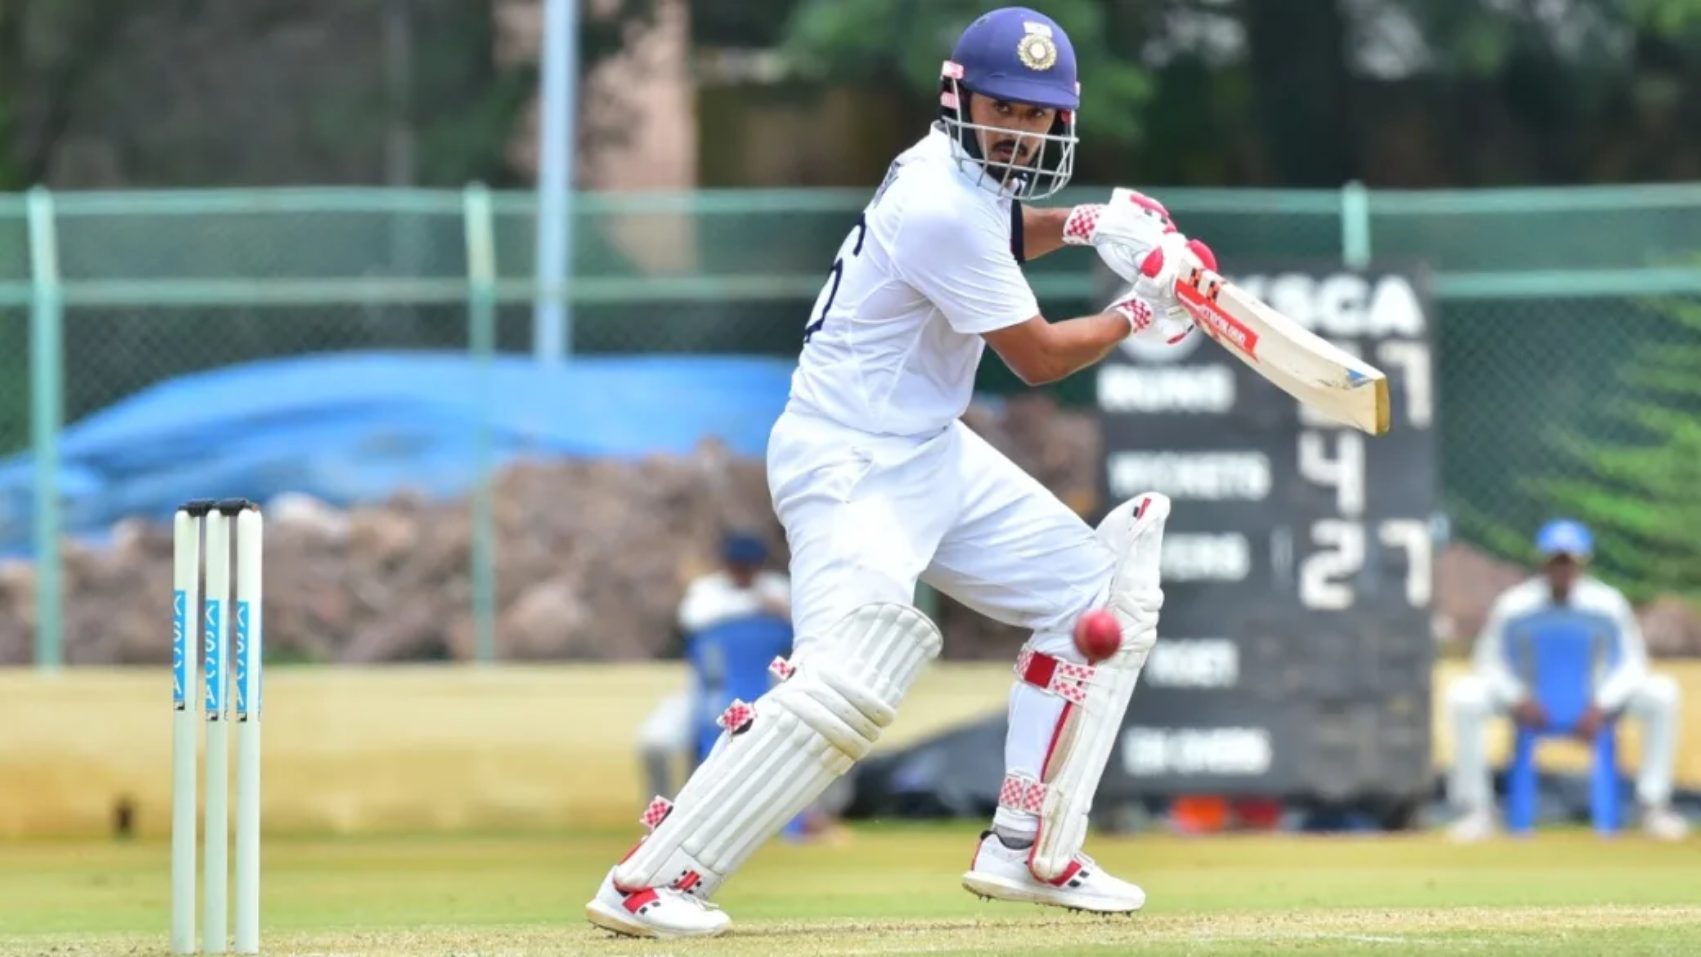 To keep West Zone on track in the Duleep Trophy final, Panchal displays courage.